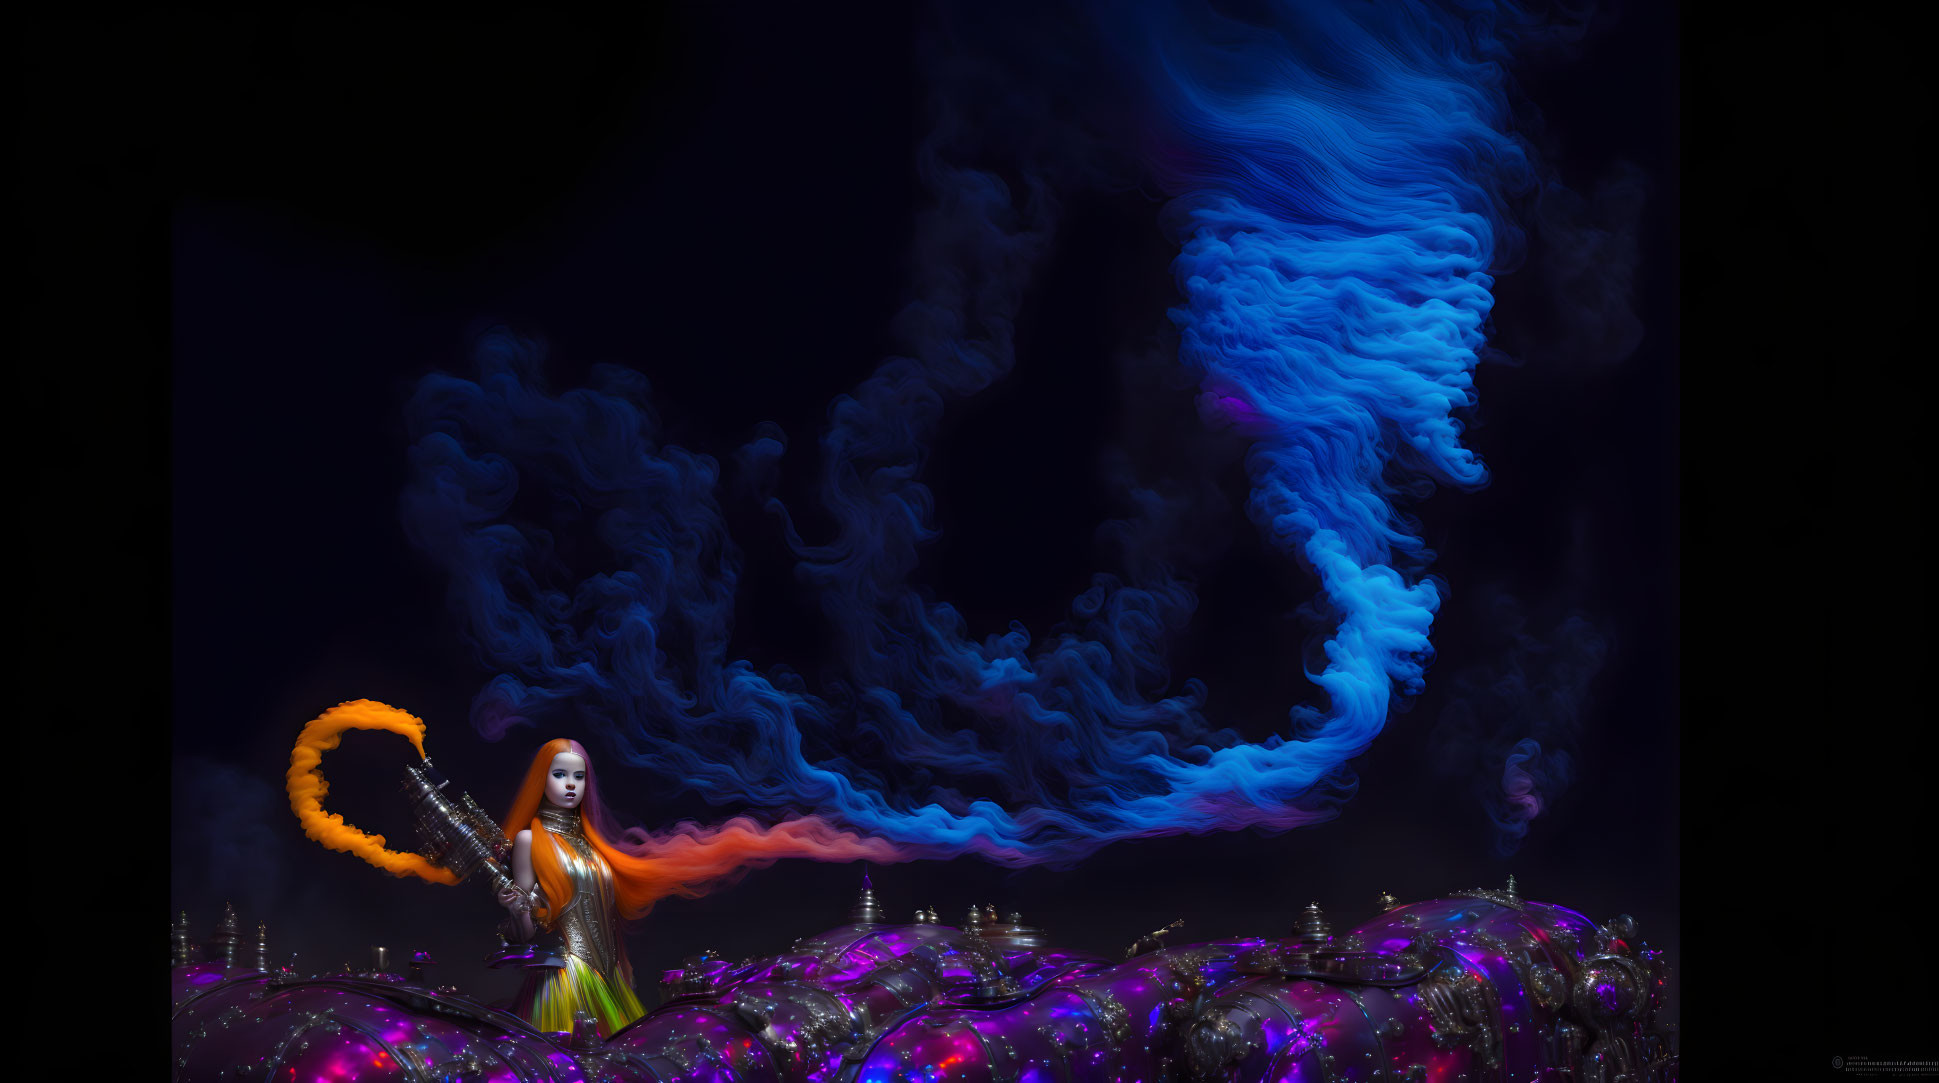 Multicolored hair woman with orange staff on vibrant shapes and blue swirl.